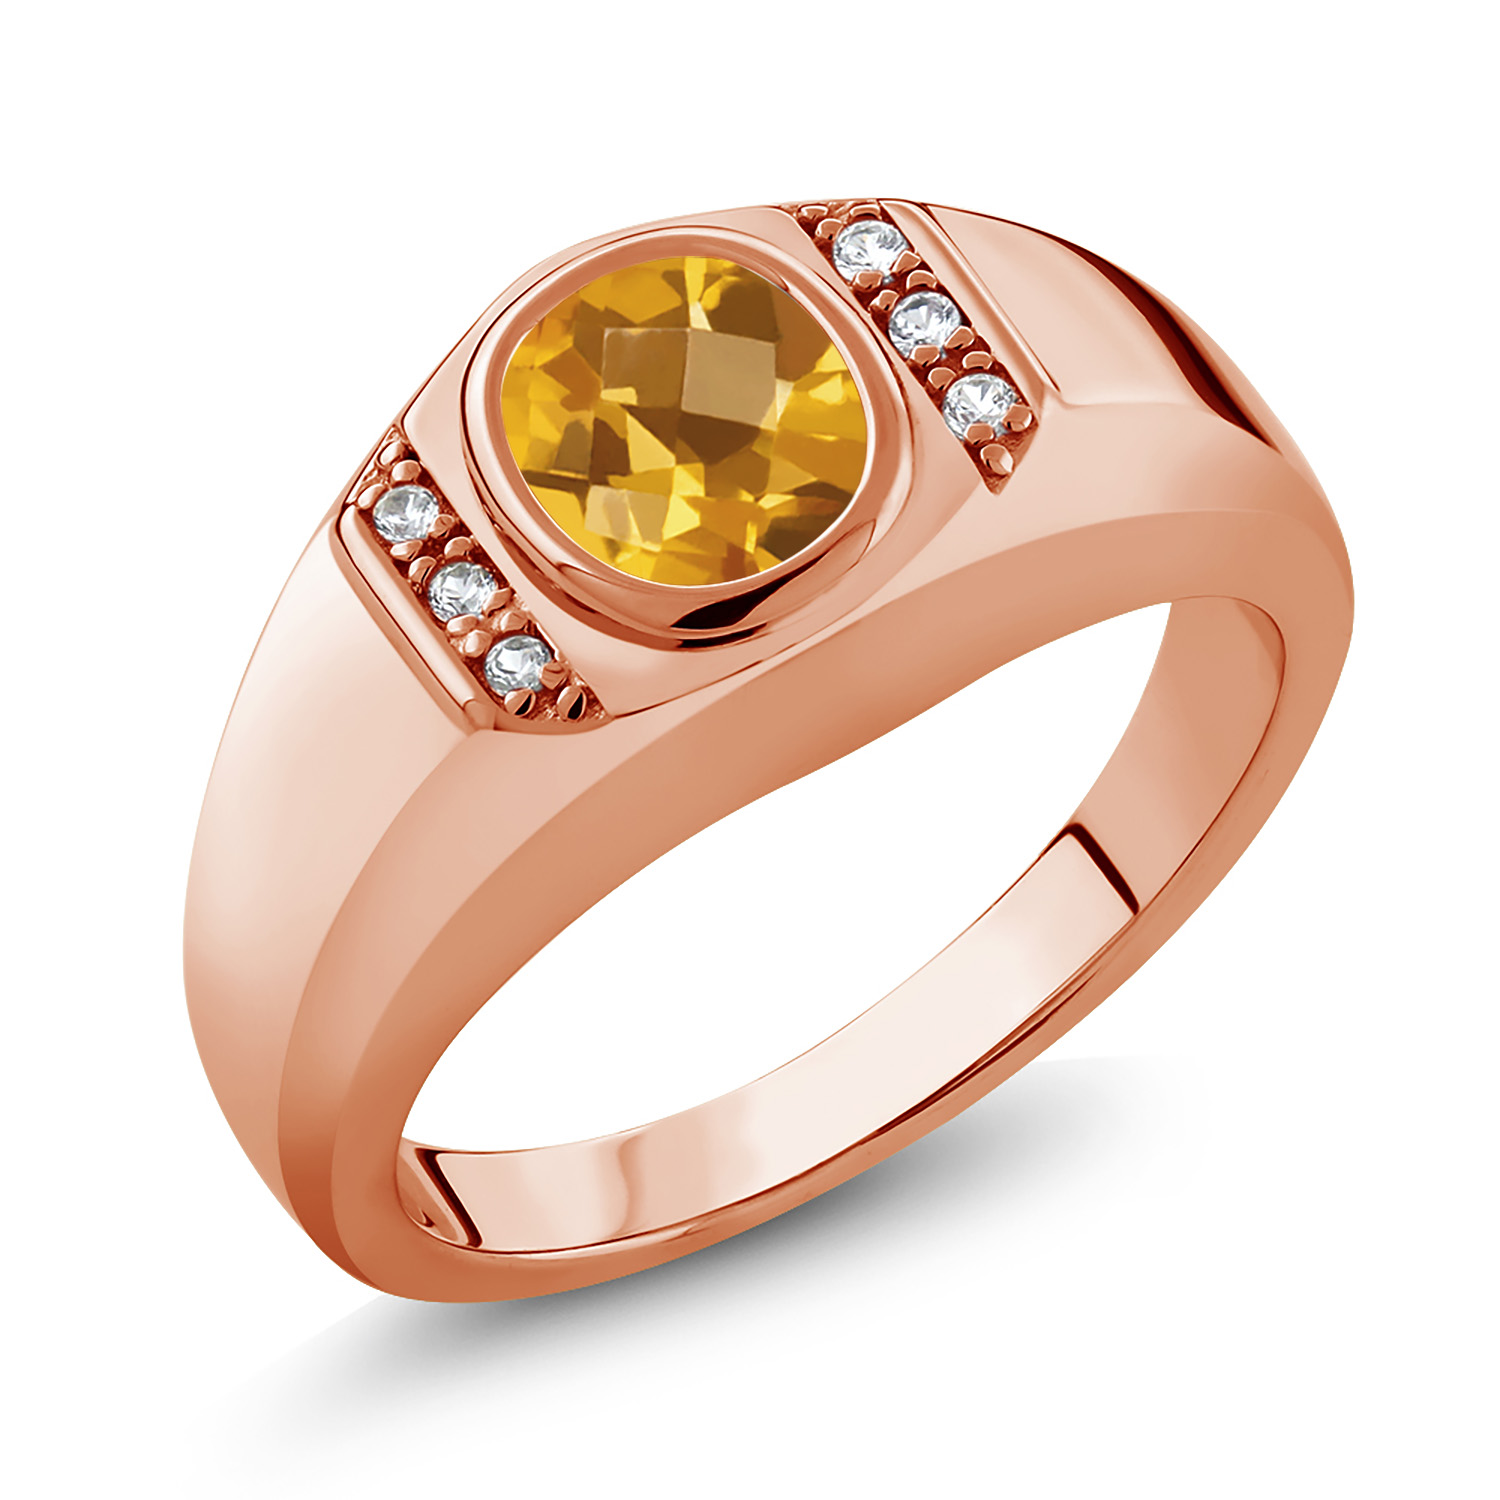 Gem Stone King 1.31 Ct Oval Checkerboard Yellow Citrine White Created Sapphire 18K Rose Gold Plated Silver Men's Ring